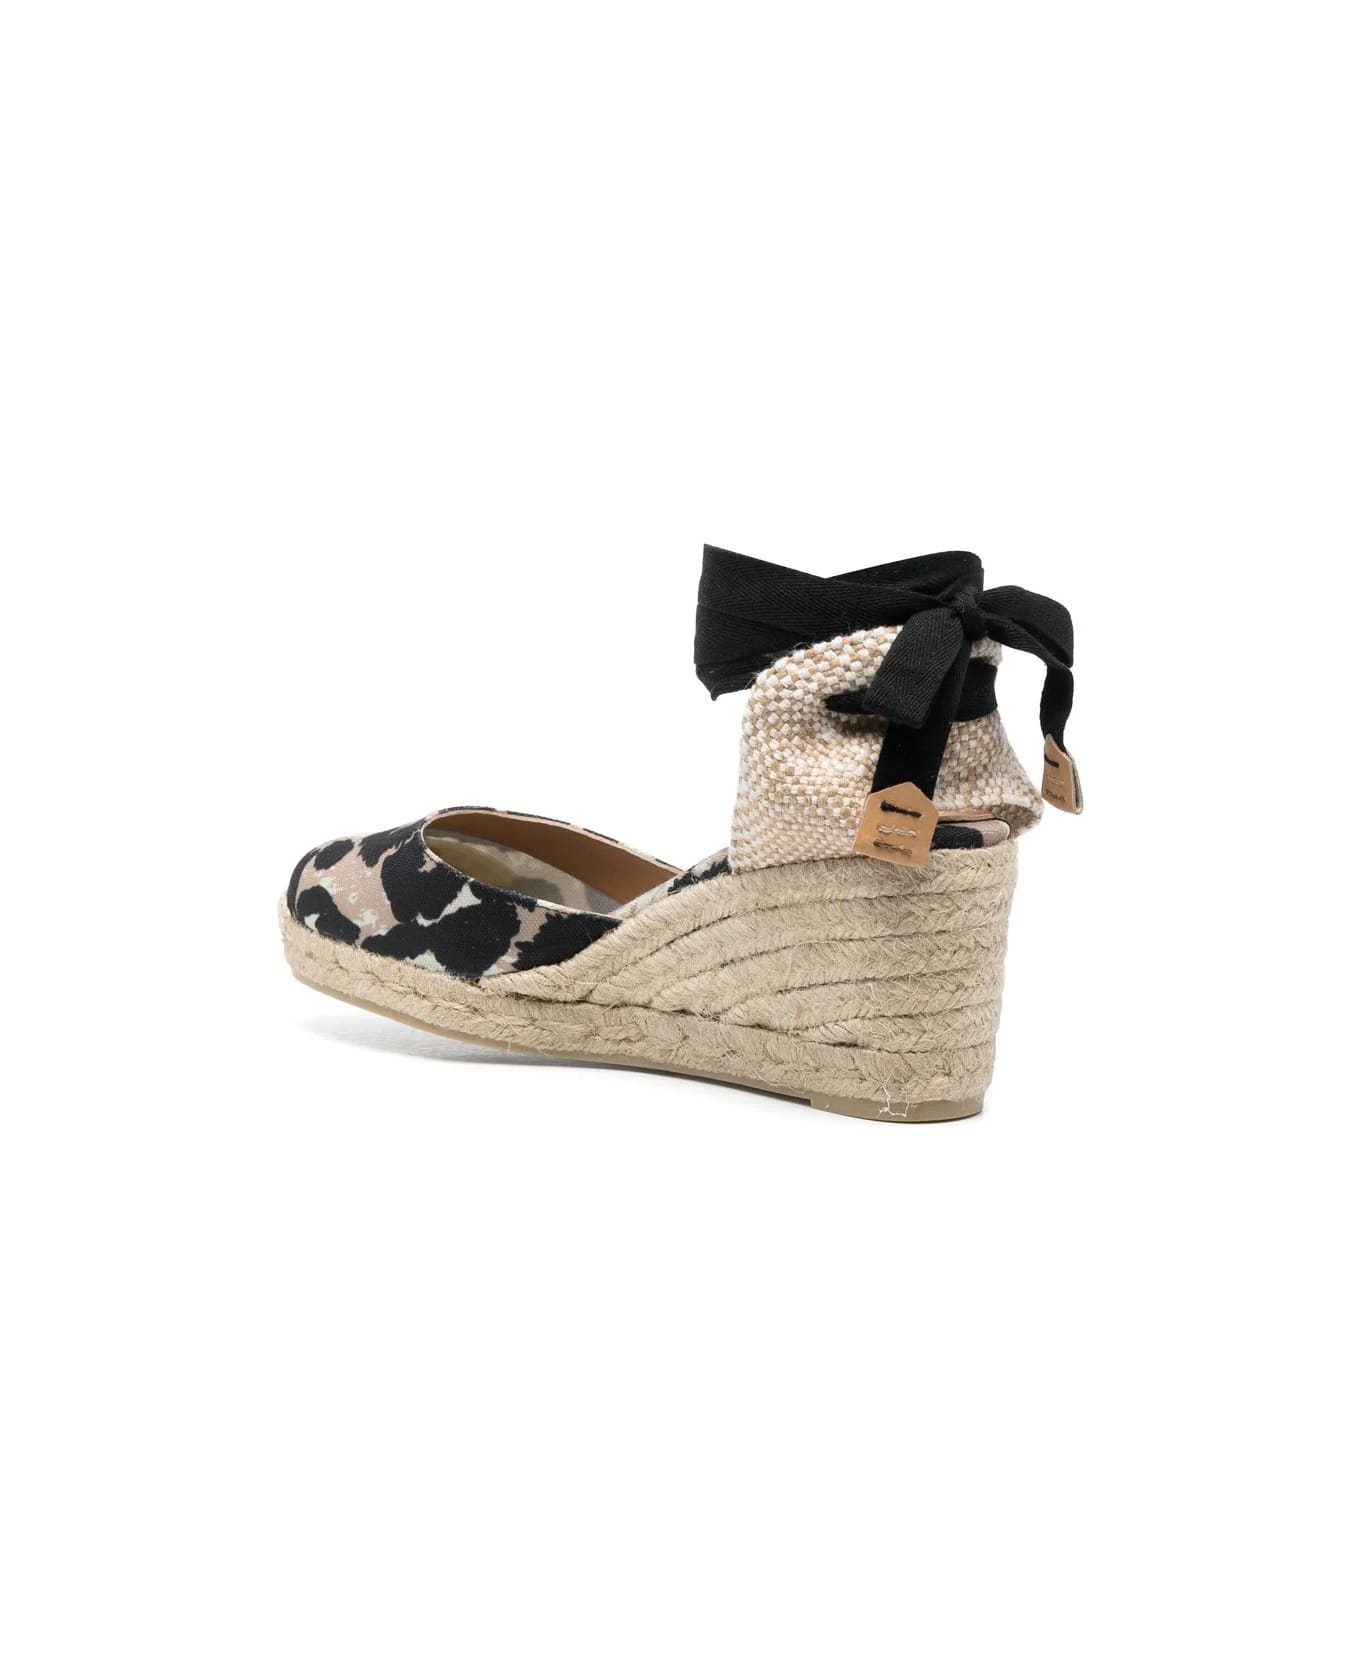 Castañer Carina Espadrilles With Laces On Ankles - Natural Black サンダル